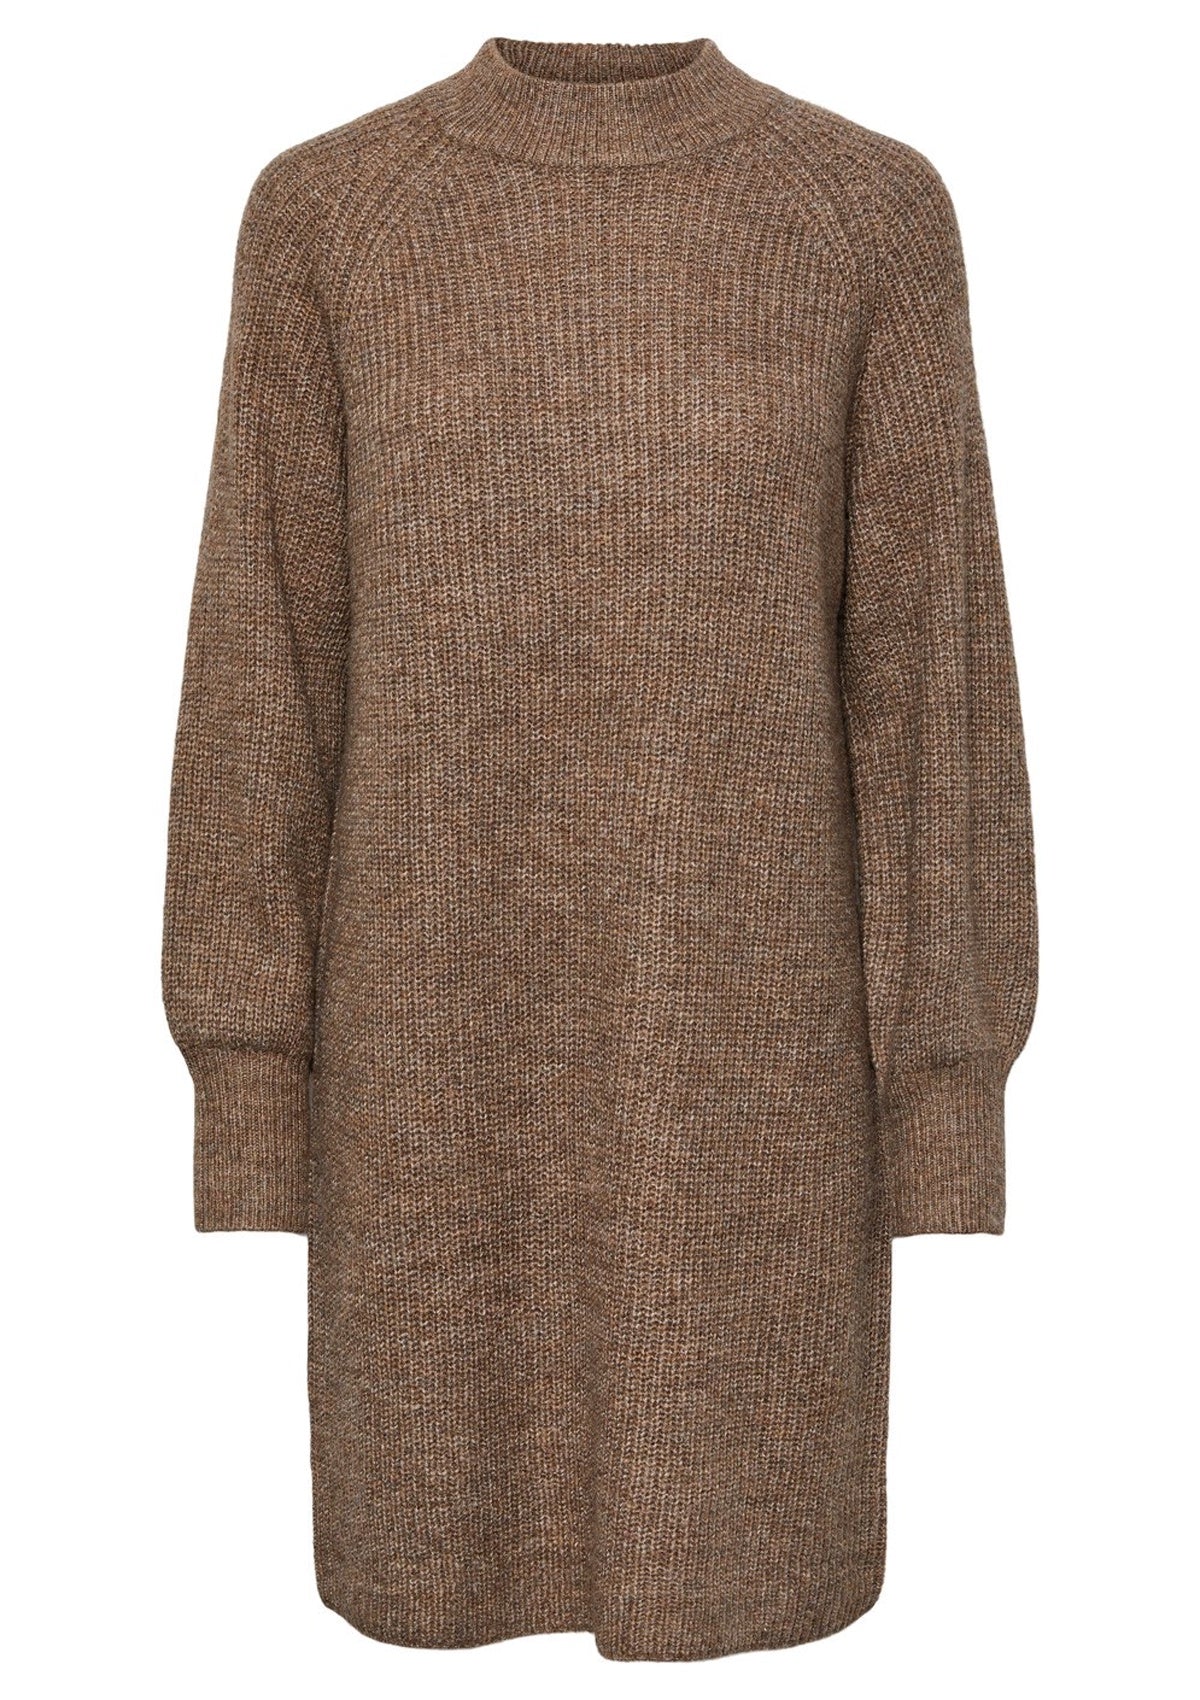 Pieces Natalie Long Sleeve Knit Dress Fossil